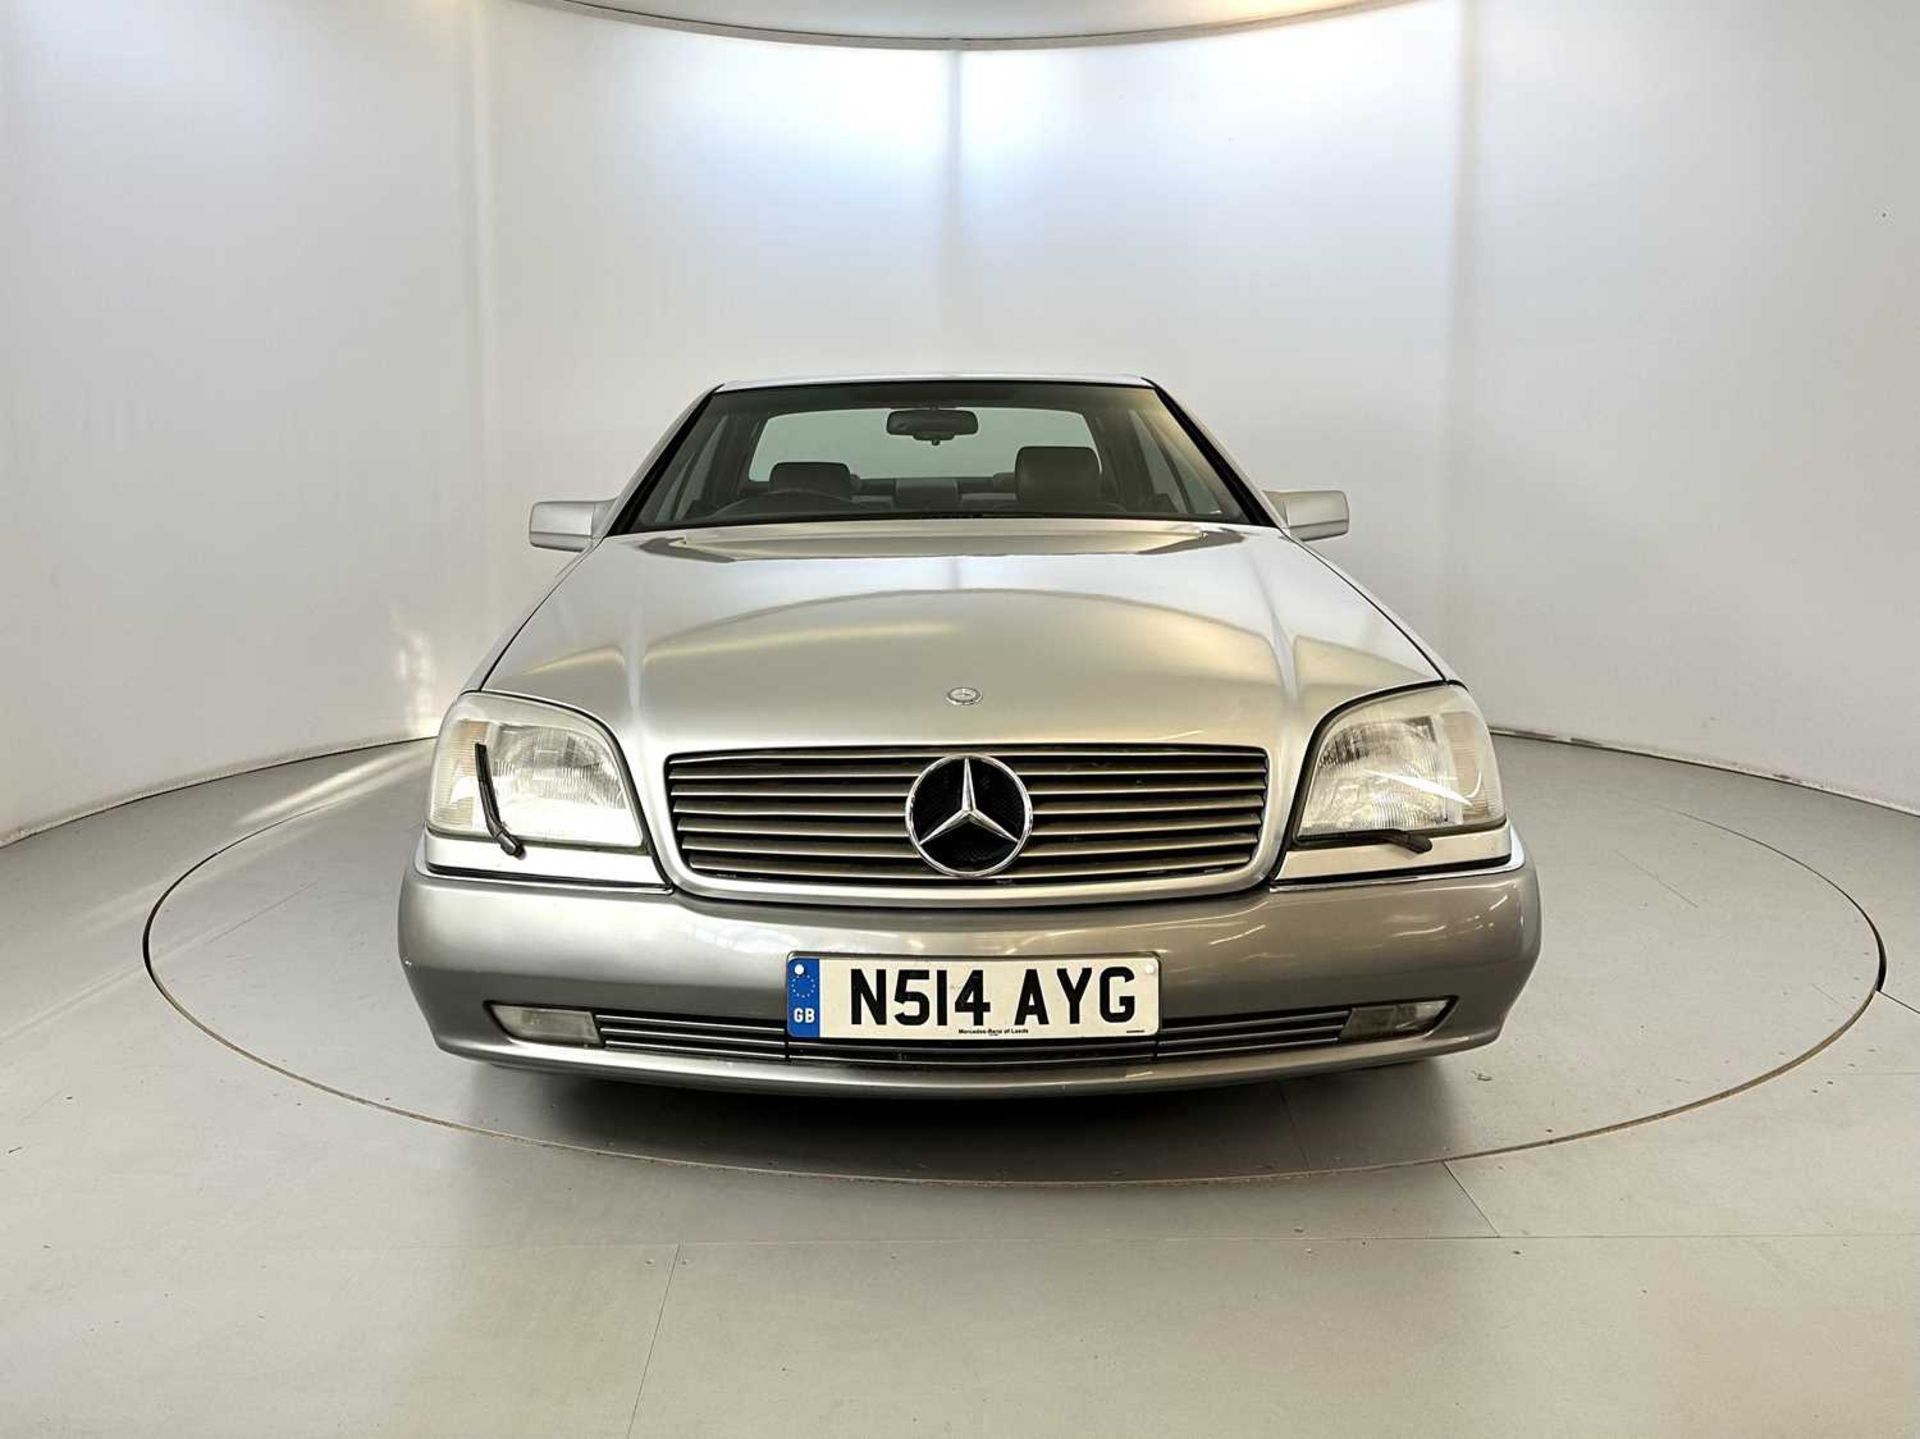 1995 Mercedes-Benz S500 Coupe - Image 2 of 30